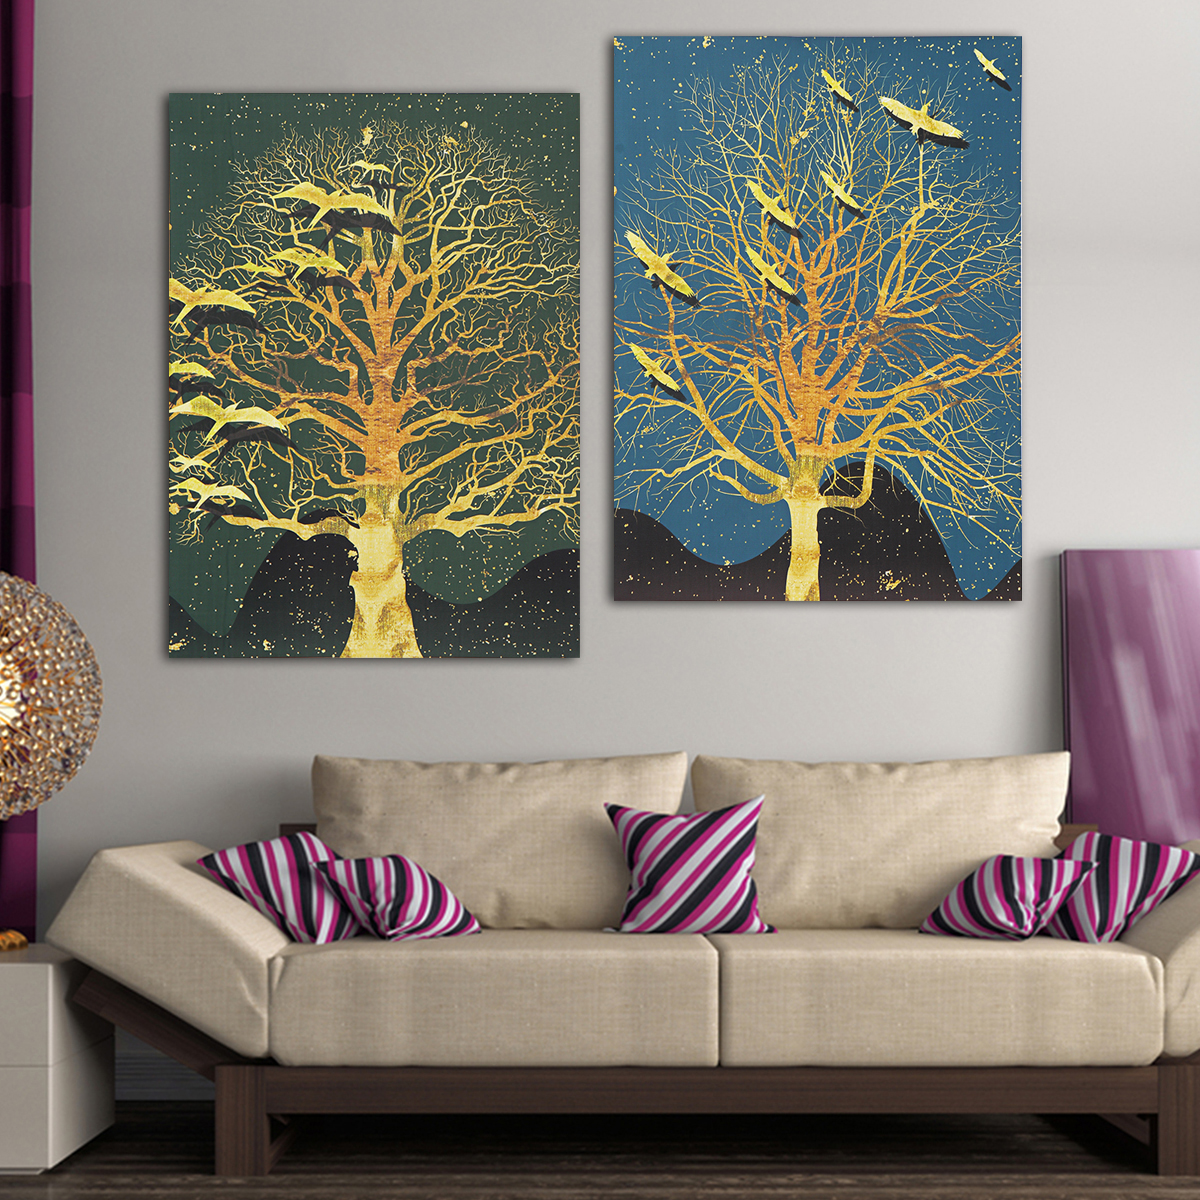 2Pcs-Modern-Tree-Canvas-Print-Paintings-Wall-Art-Unframed-Picture-Home-Decor-1430564